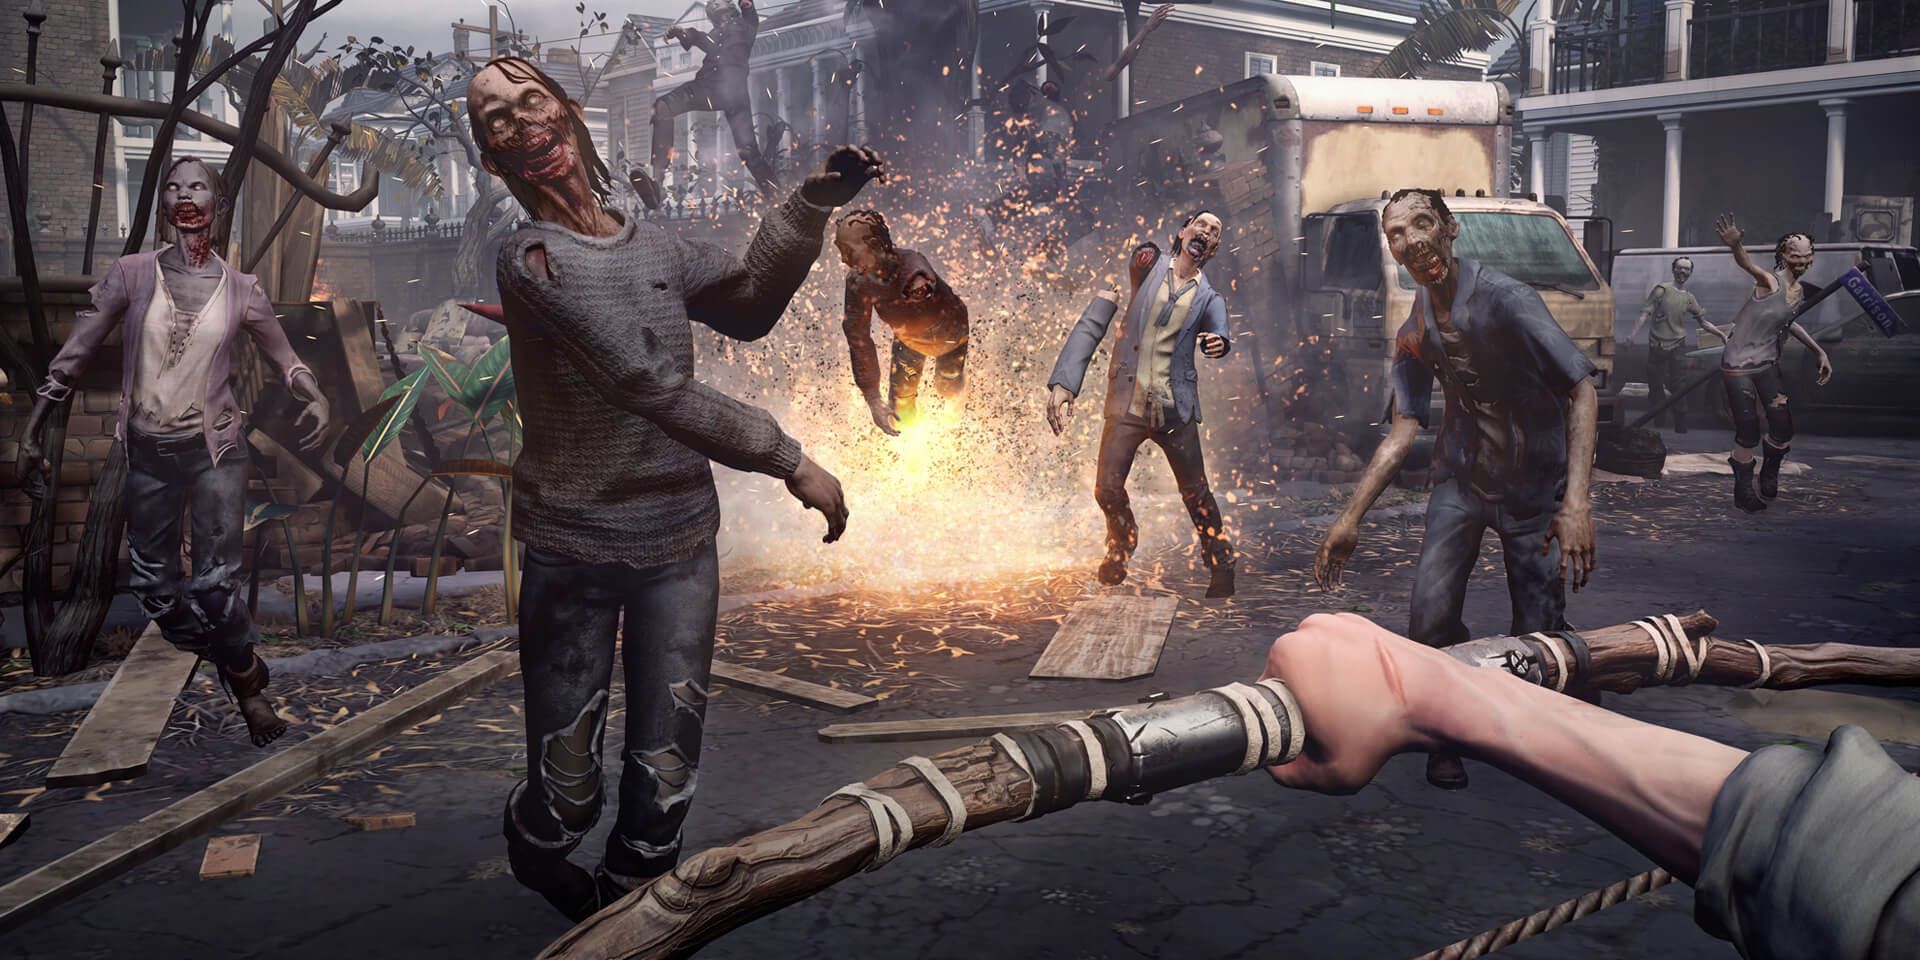 A player shoots an arrow at zombies in The Walking Dead: Saints & Sinners.